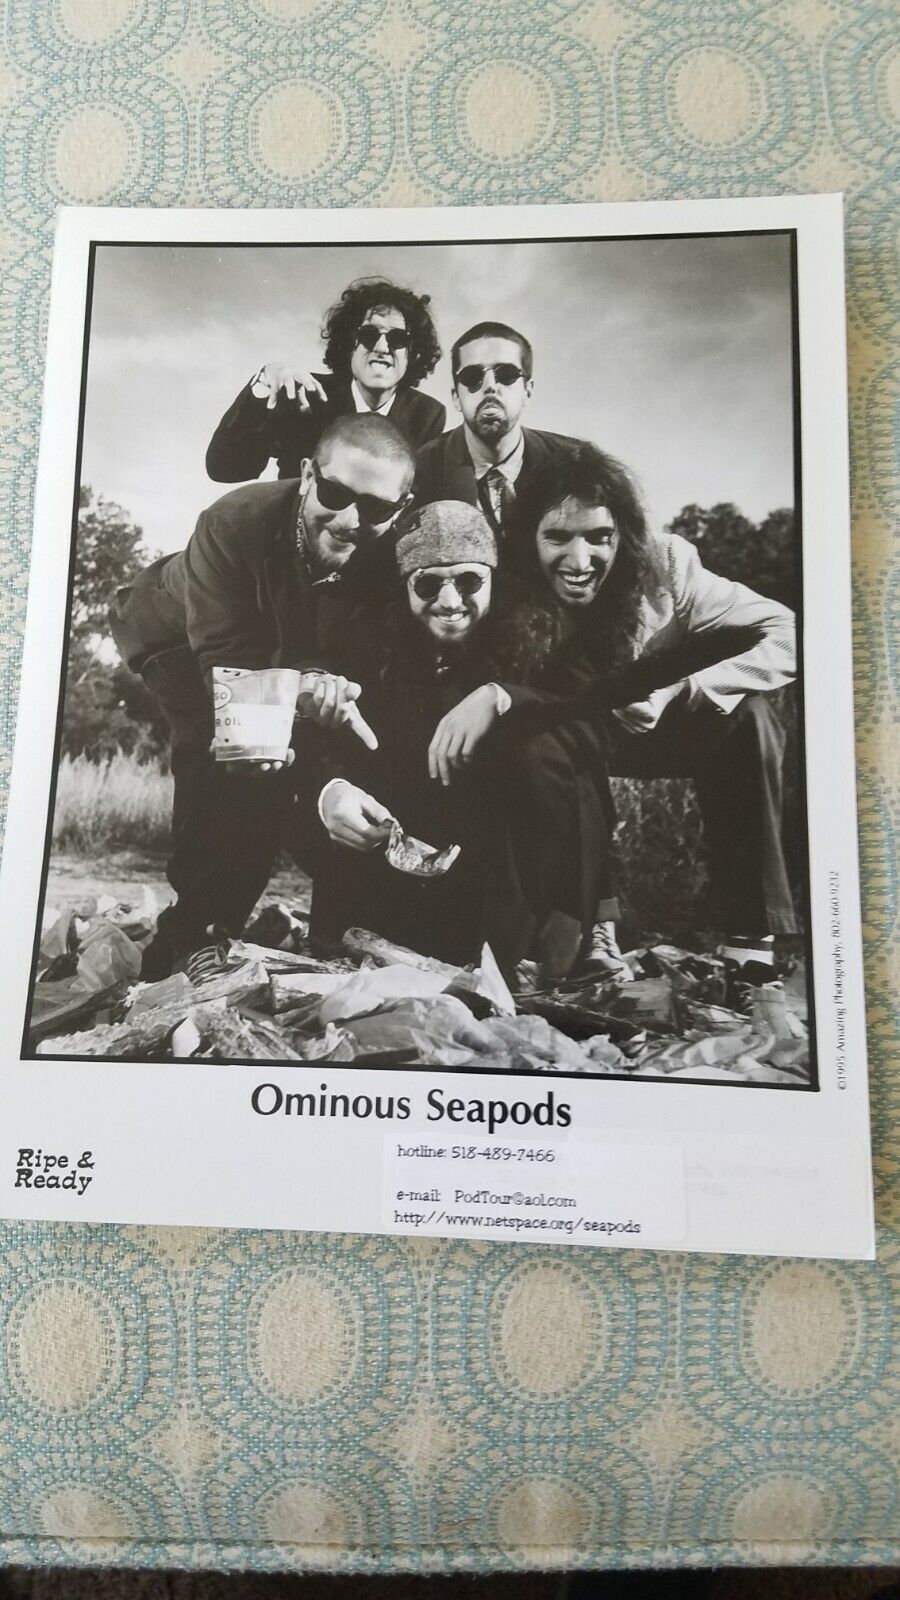 RC559 Band 8x10 Press Photo PROMO MEDIA  OMINOUS SOUNDS, RIPE AND READY